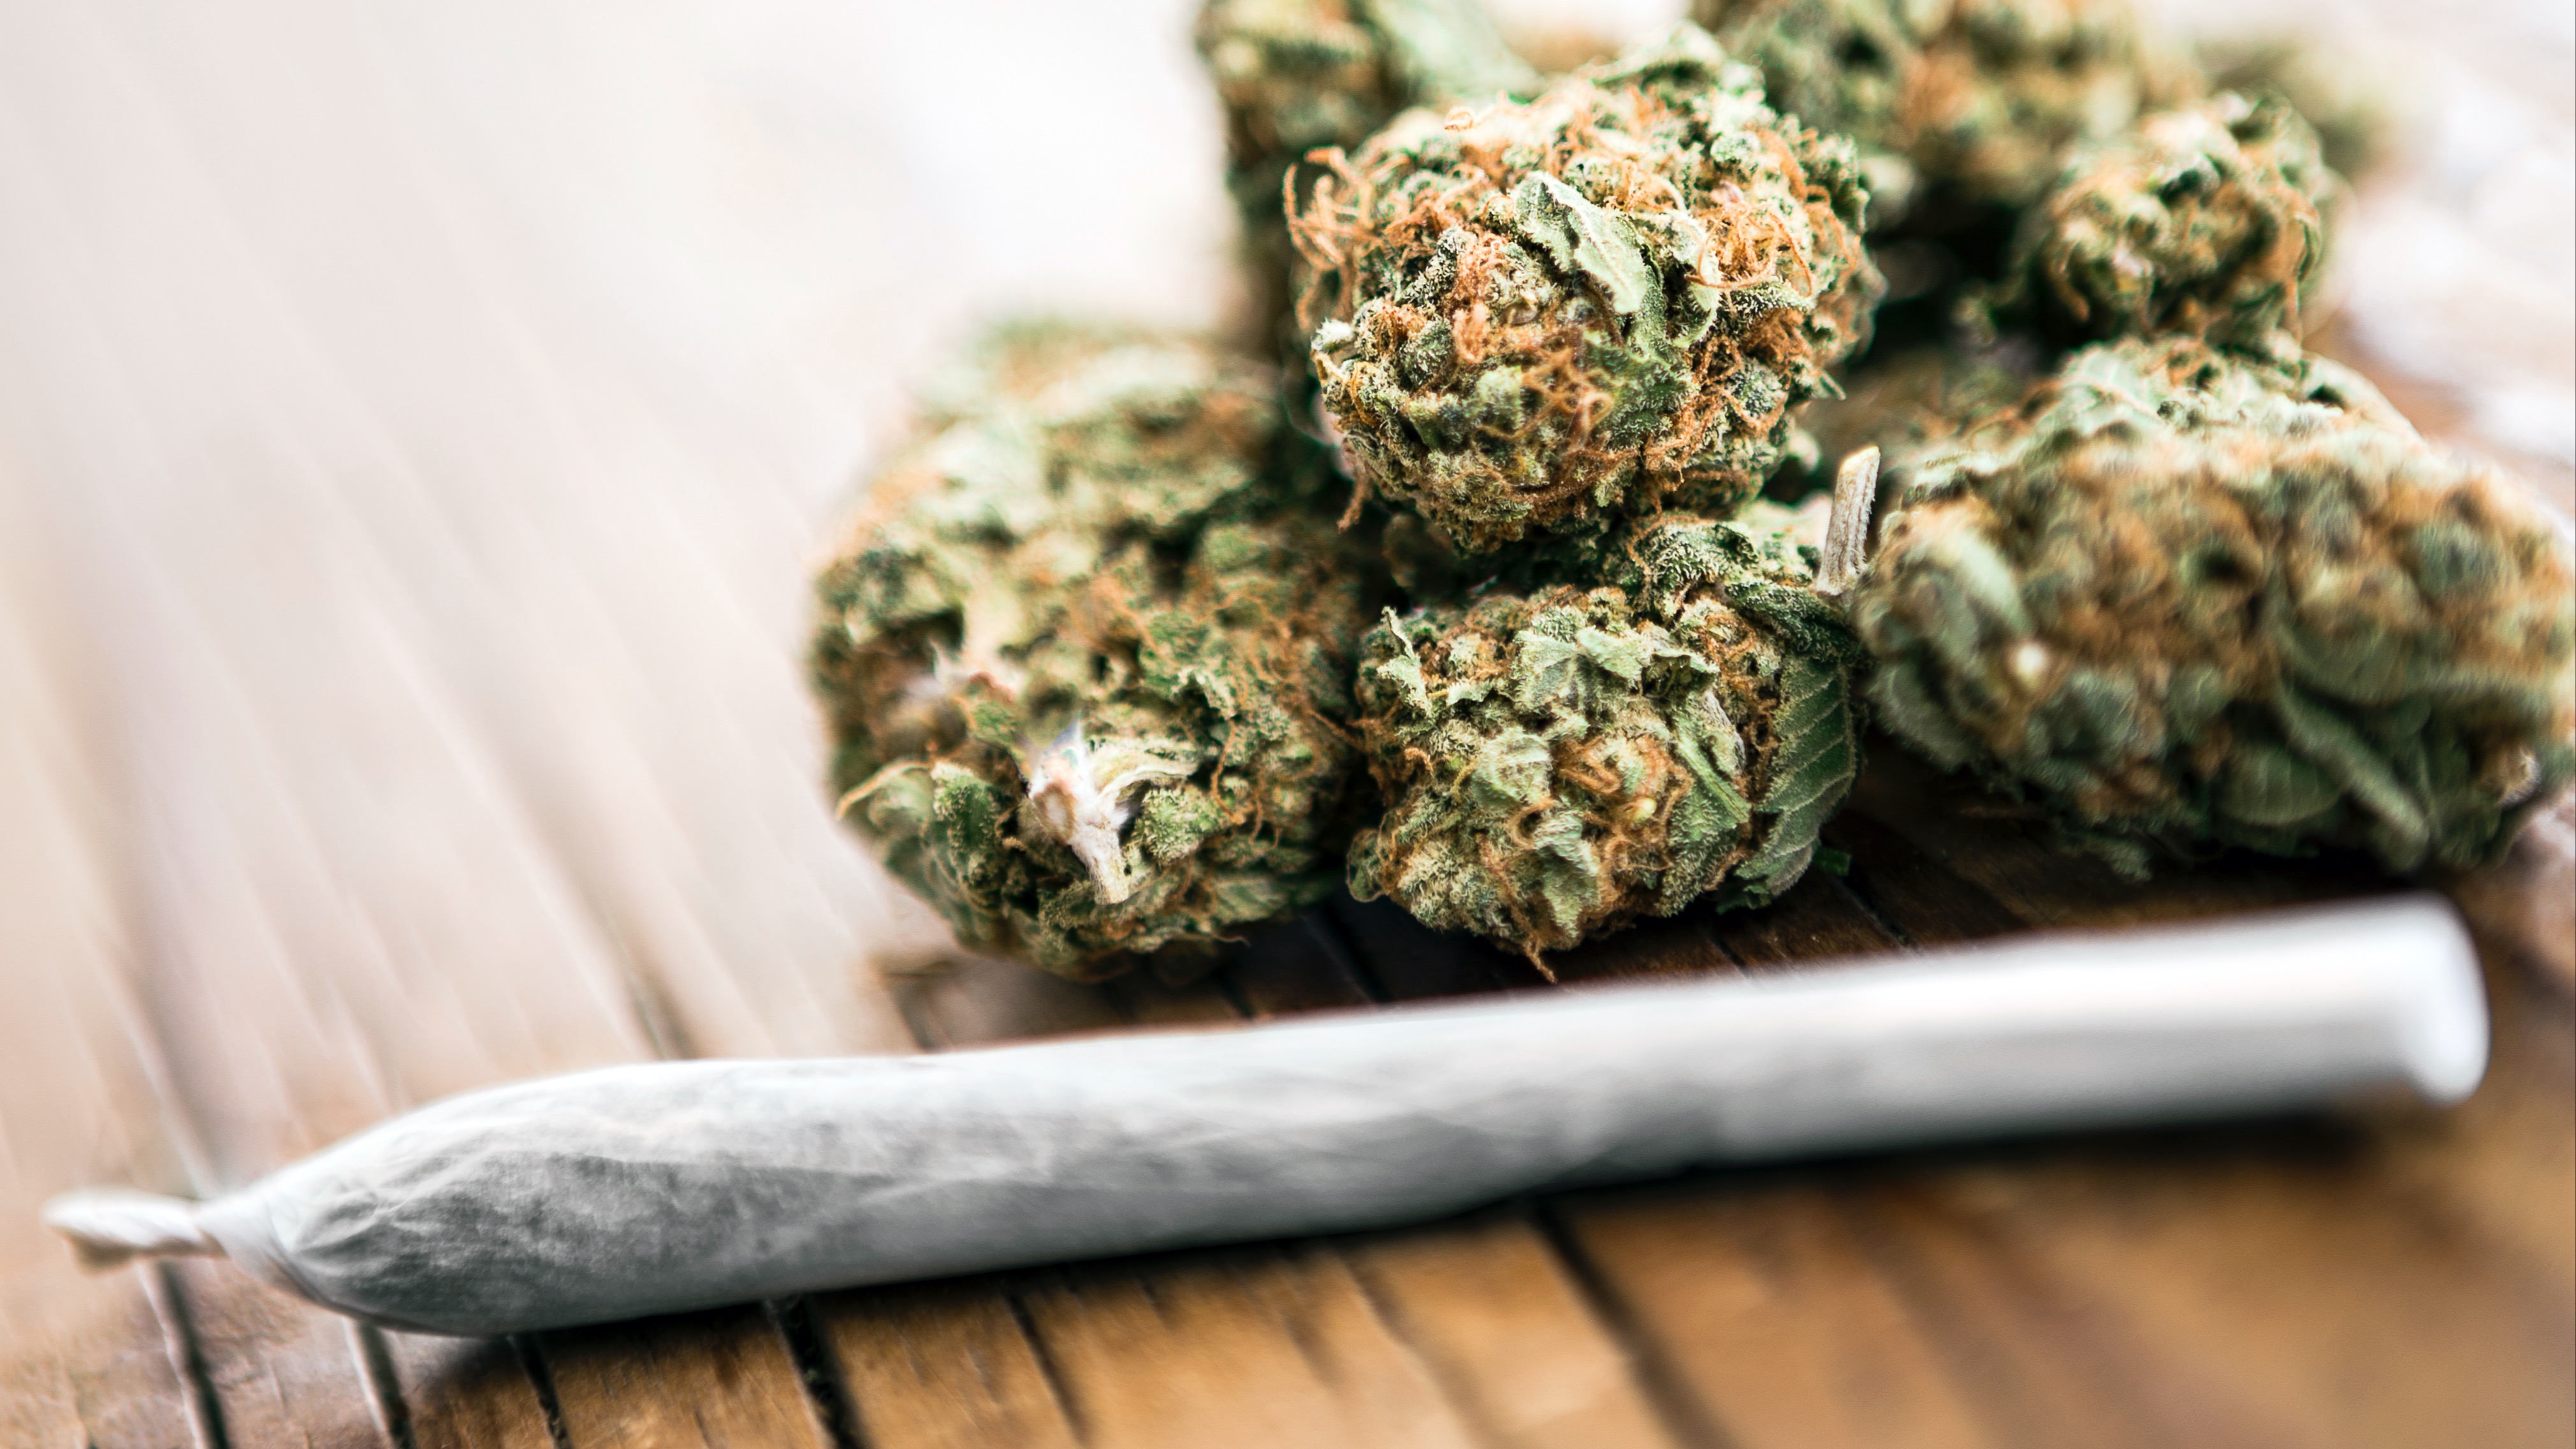 Know Your Rights for Possession of Marijuana | Dial-A-Law